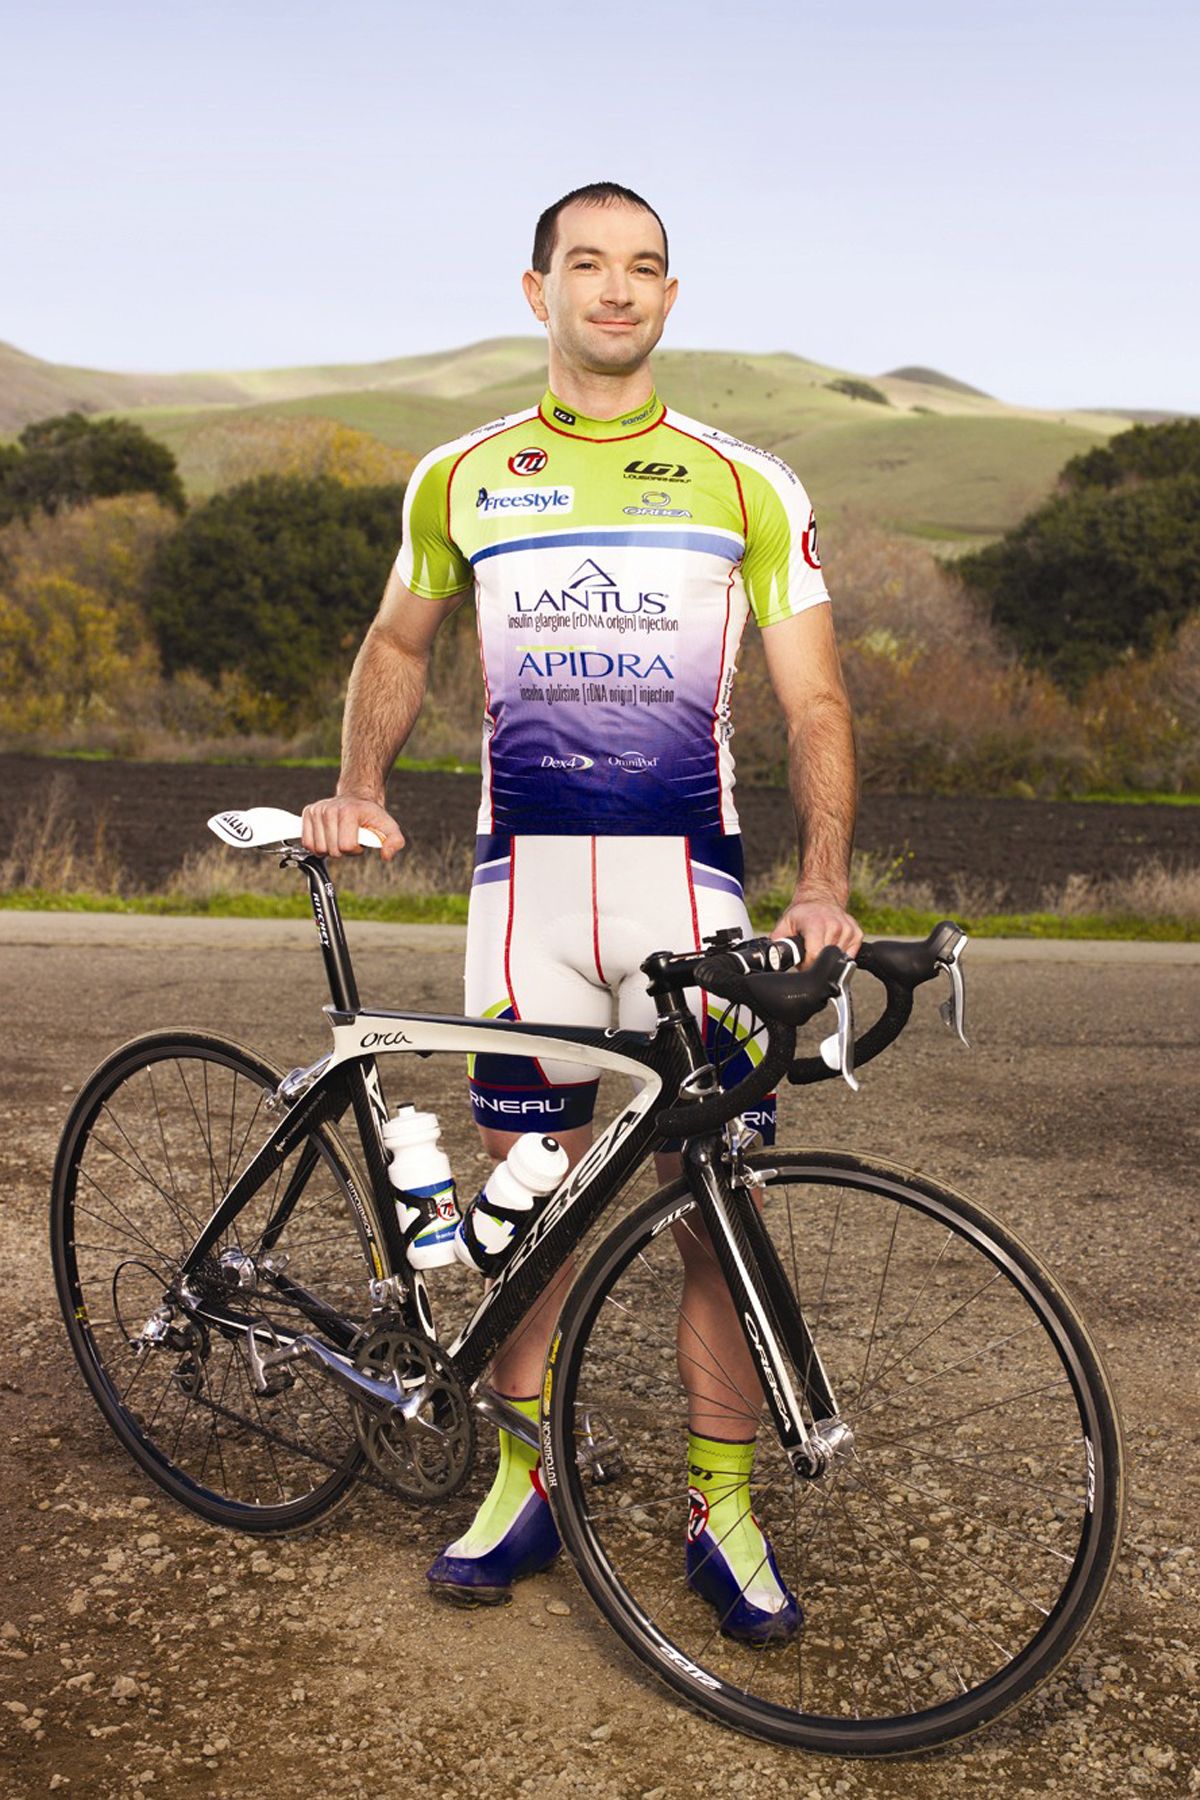 Now: Diabetic Kyle Rose gets ready to ride in 3,000-mile race. (The Spokesman-Review)